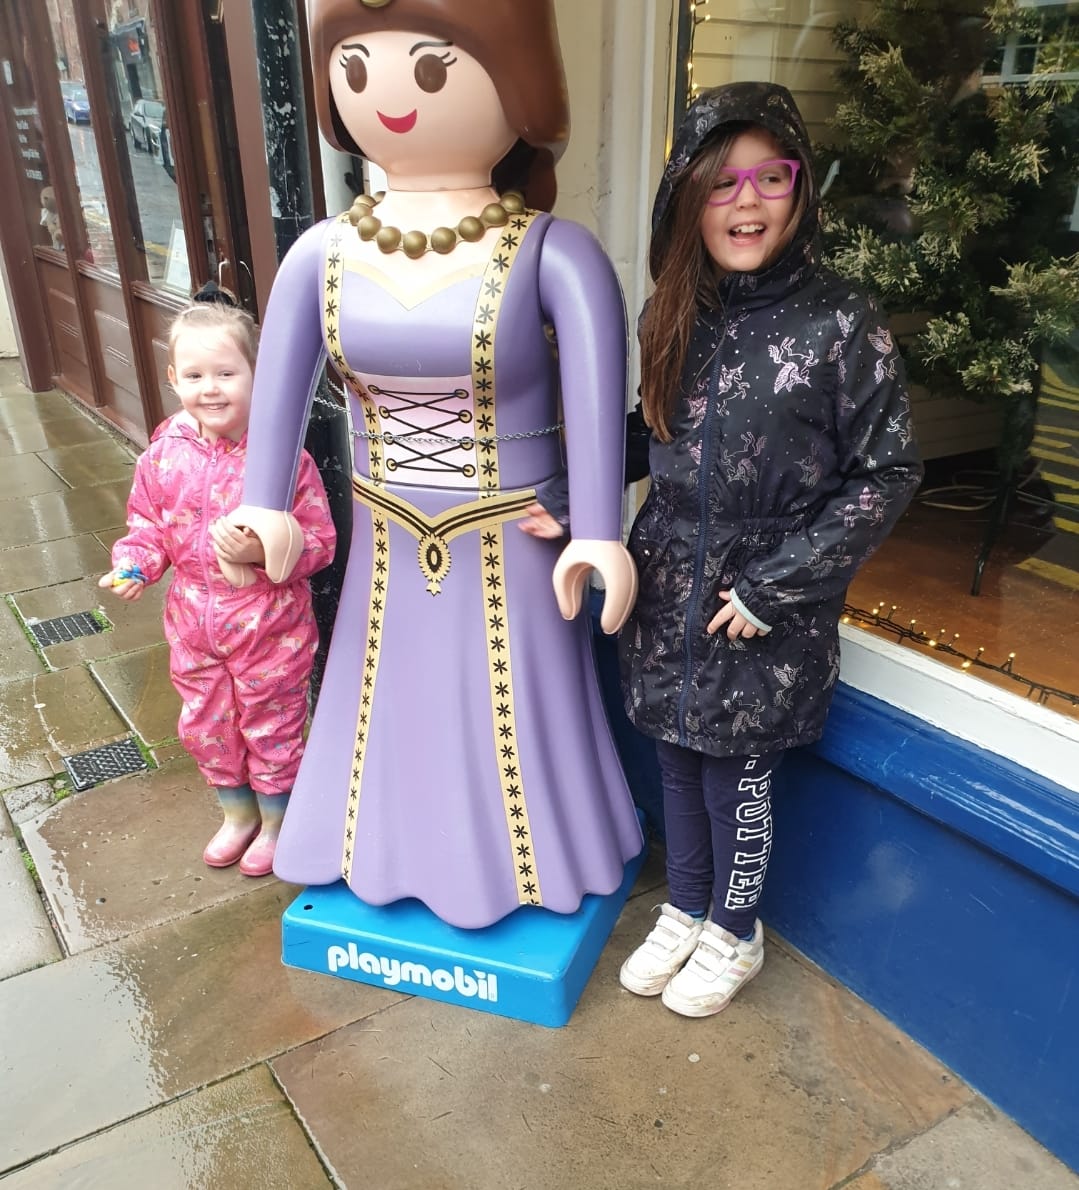 Danielle Cruickshank's children Kayla and Scarlet with Princess Poppy outside Fun Junction Toy Shop on Old High Street, Perth